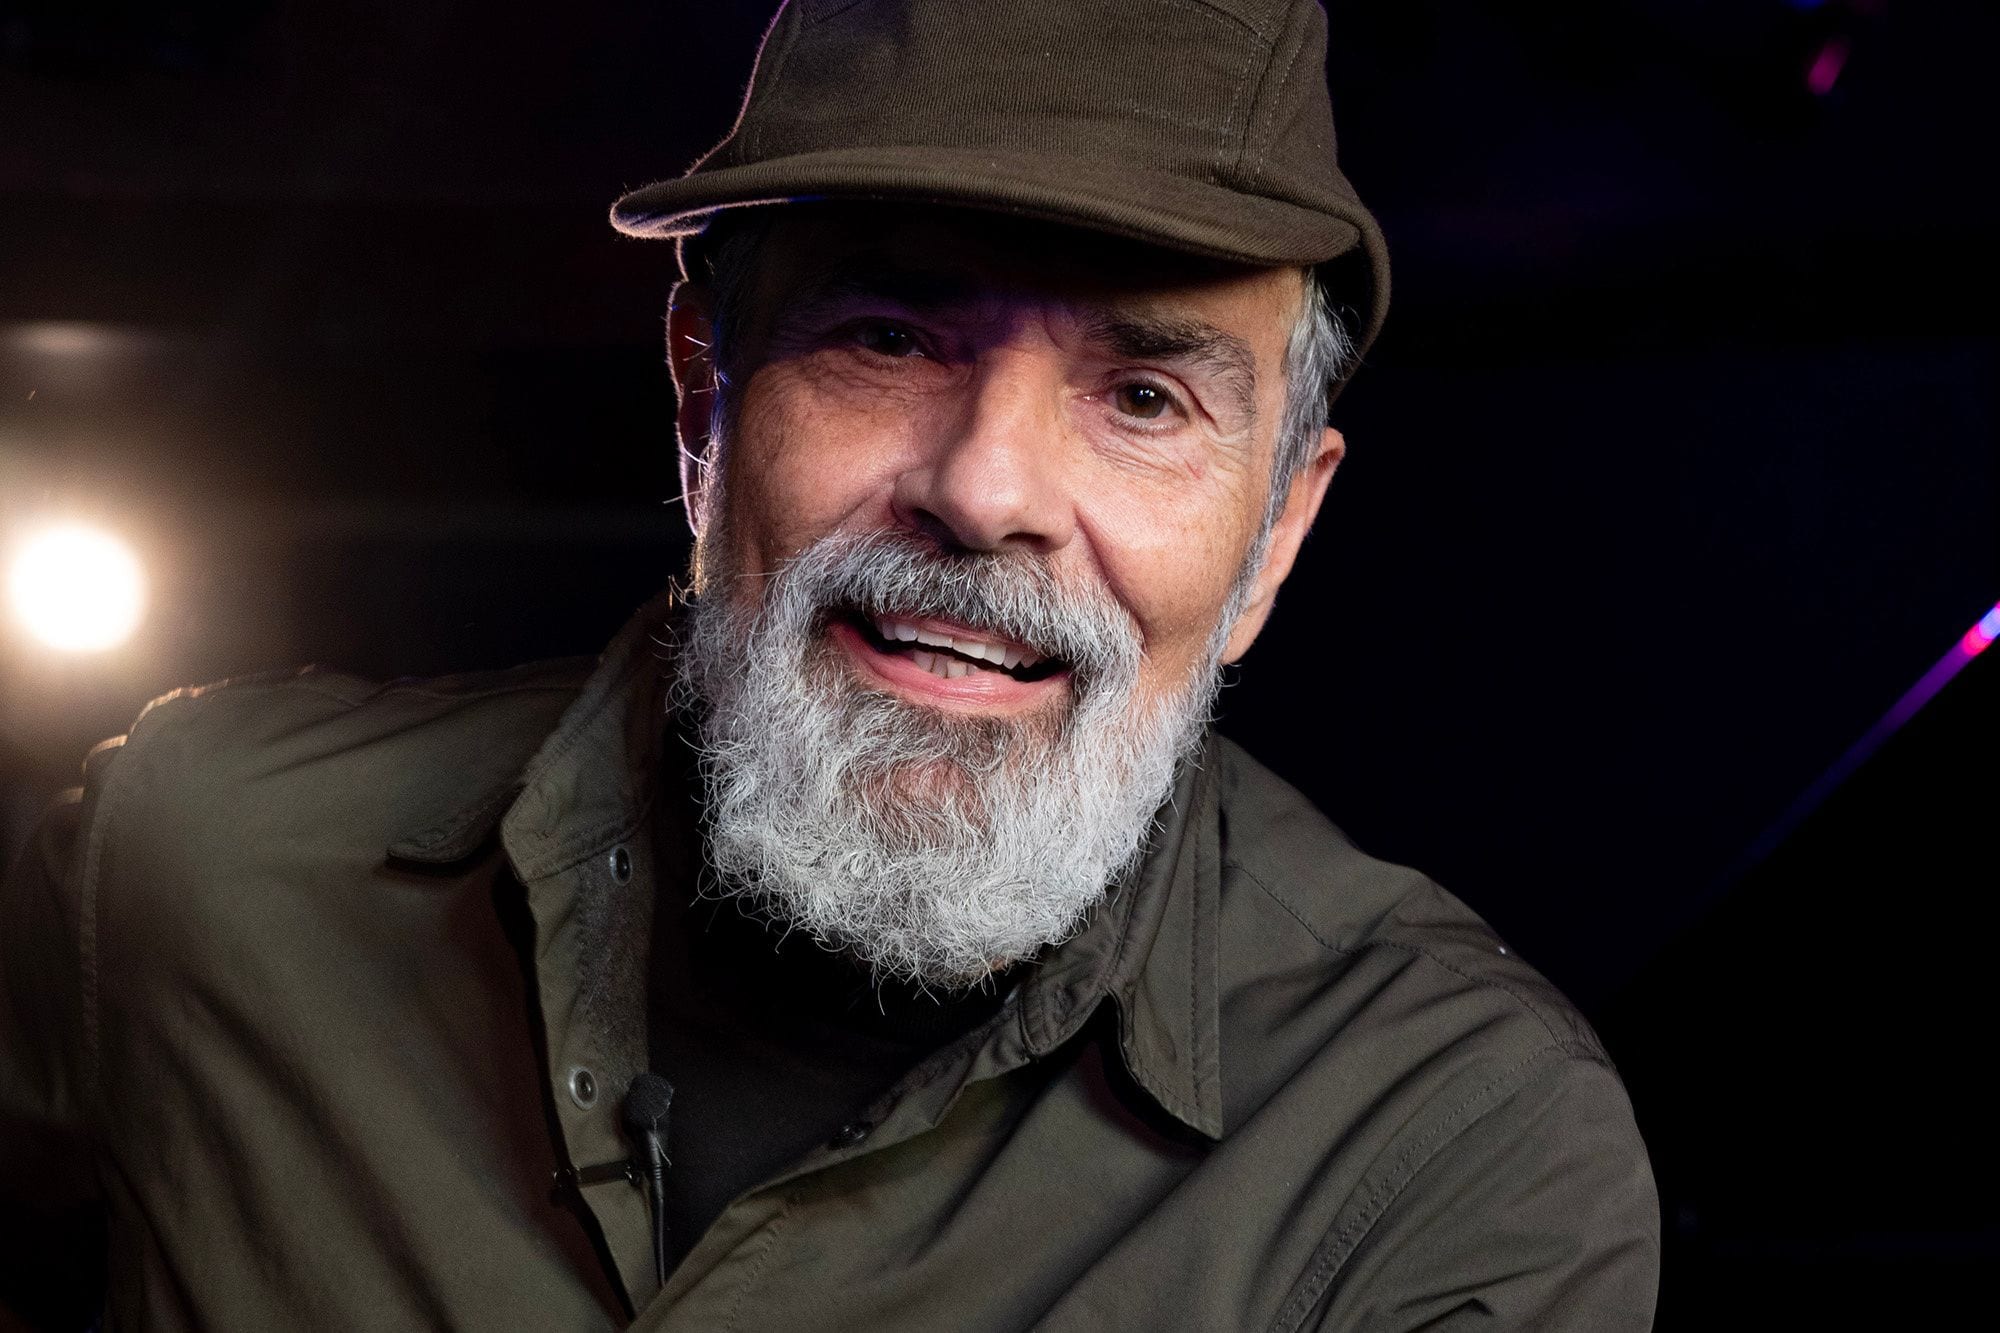 Reaching for the Sky: An Interview with Singer-Songwriter Bruce Sudano